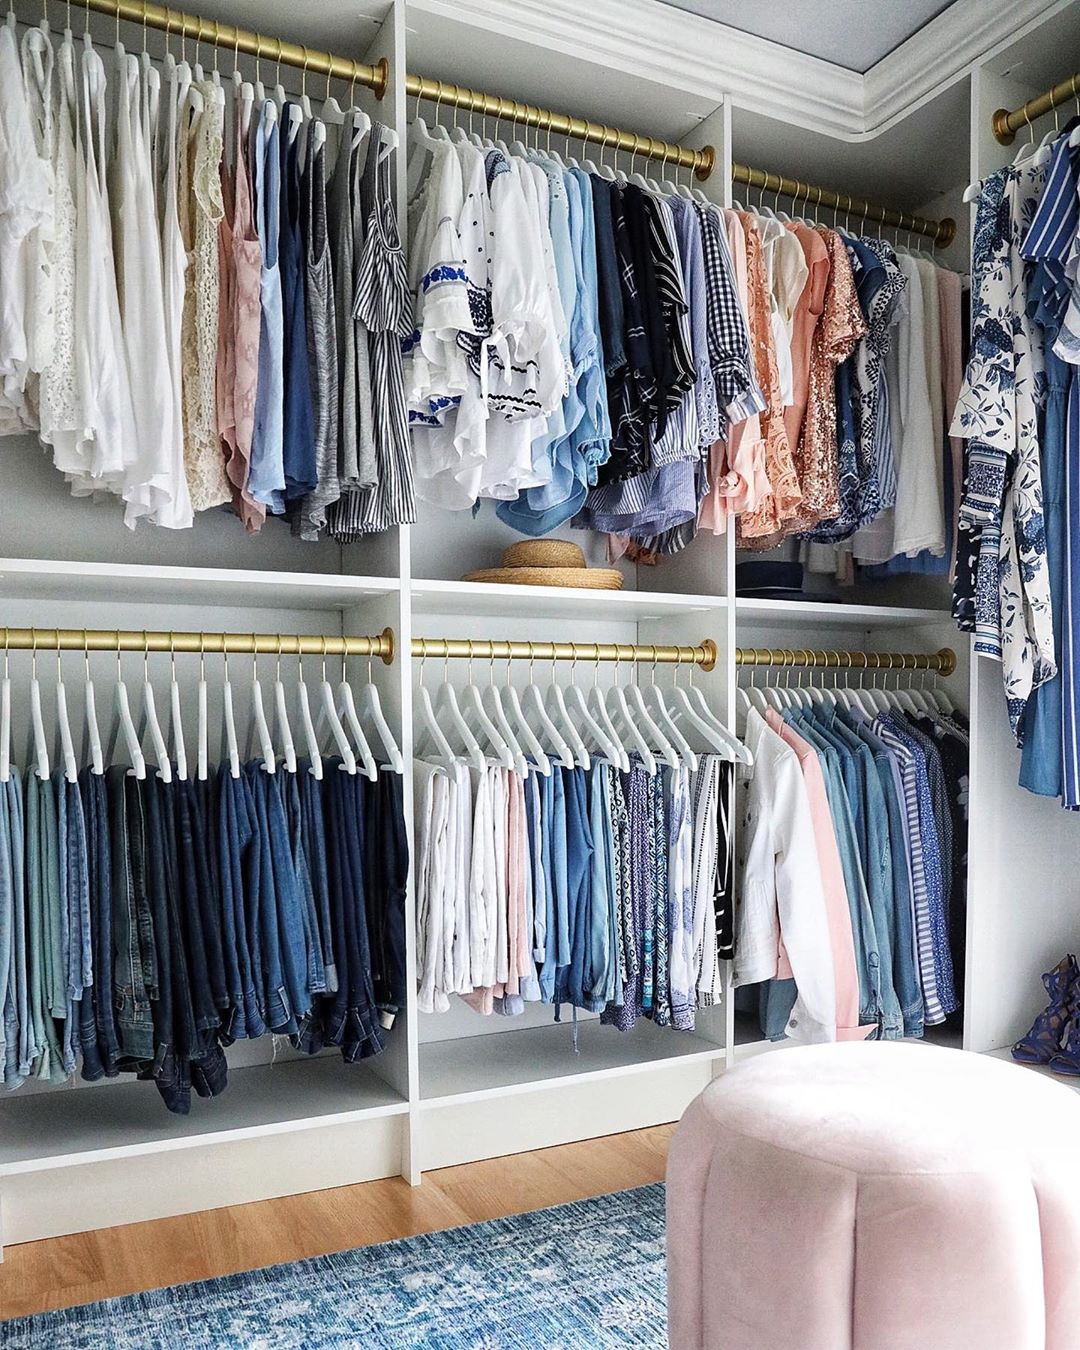 Closet with Clothes Organized by Size. Photo by Instagram user @serinamariani